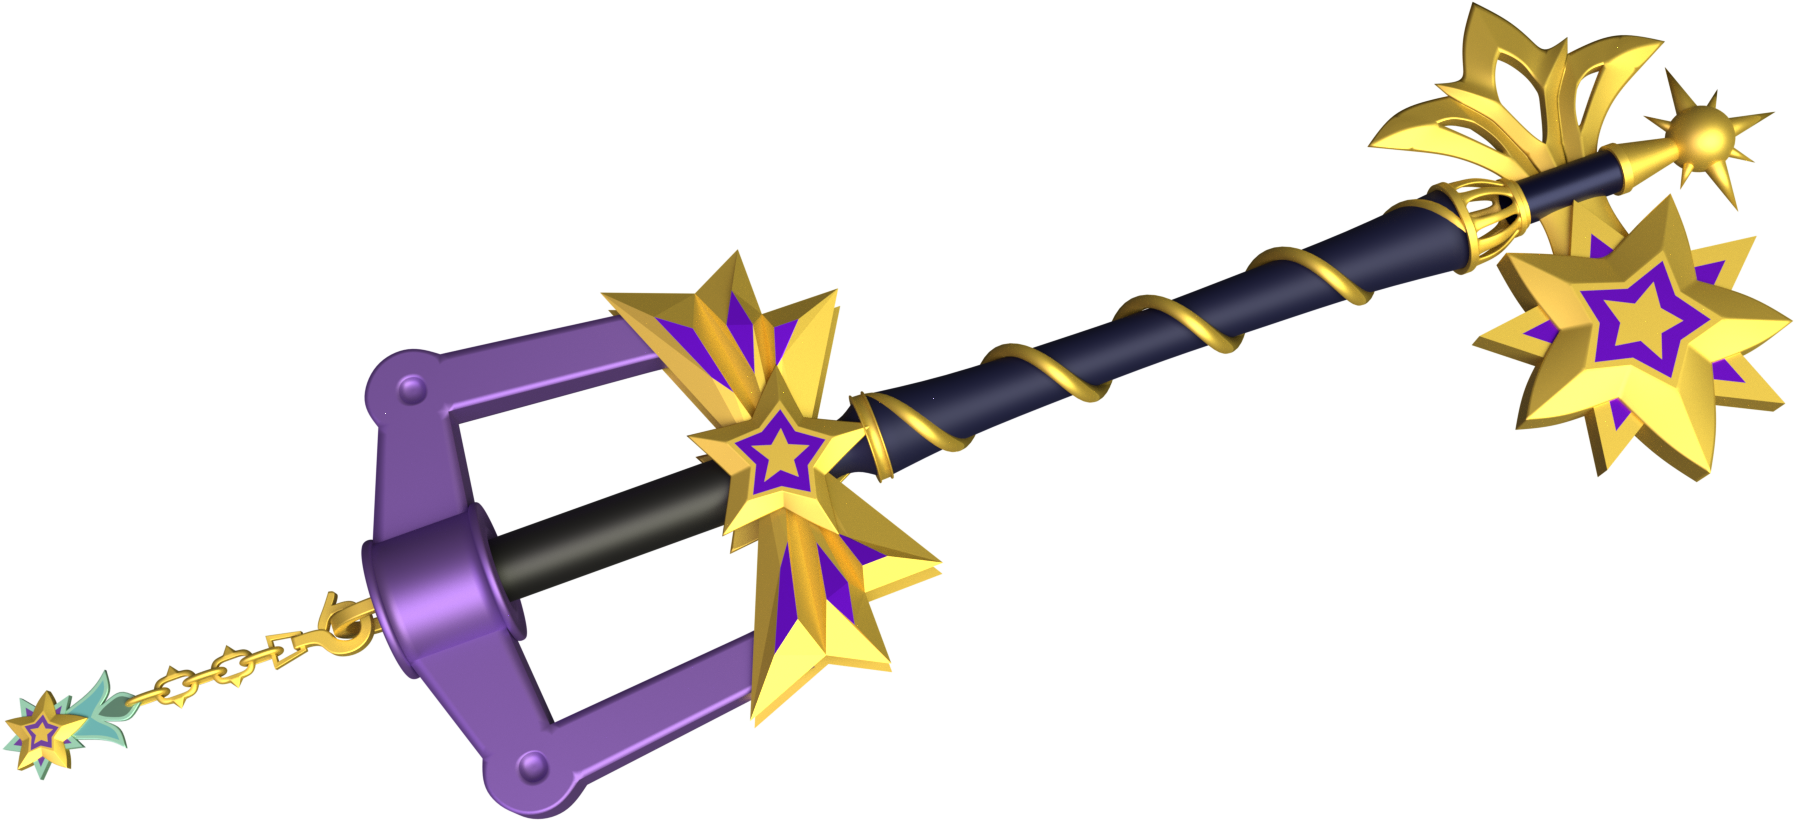 kingdom-hearts-starlight-keyblade-clipart-large-size-png-image-pikpng